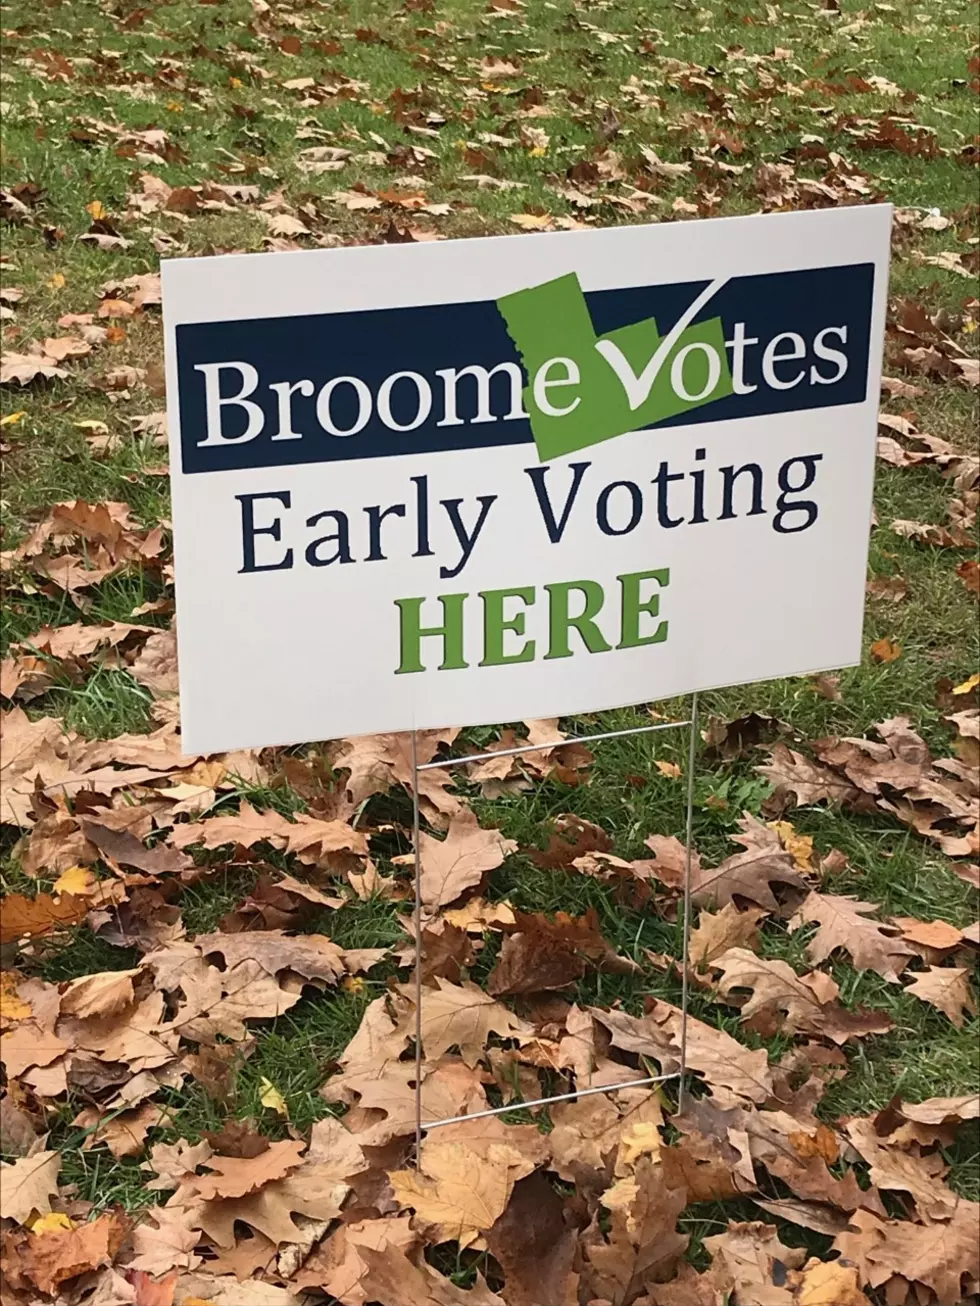 Big Turnout for Early Voting in Broome